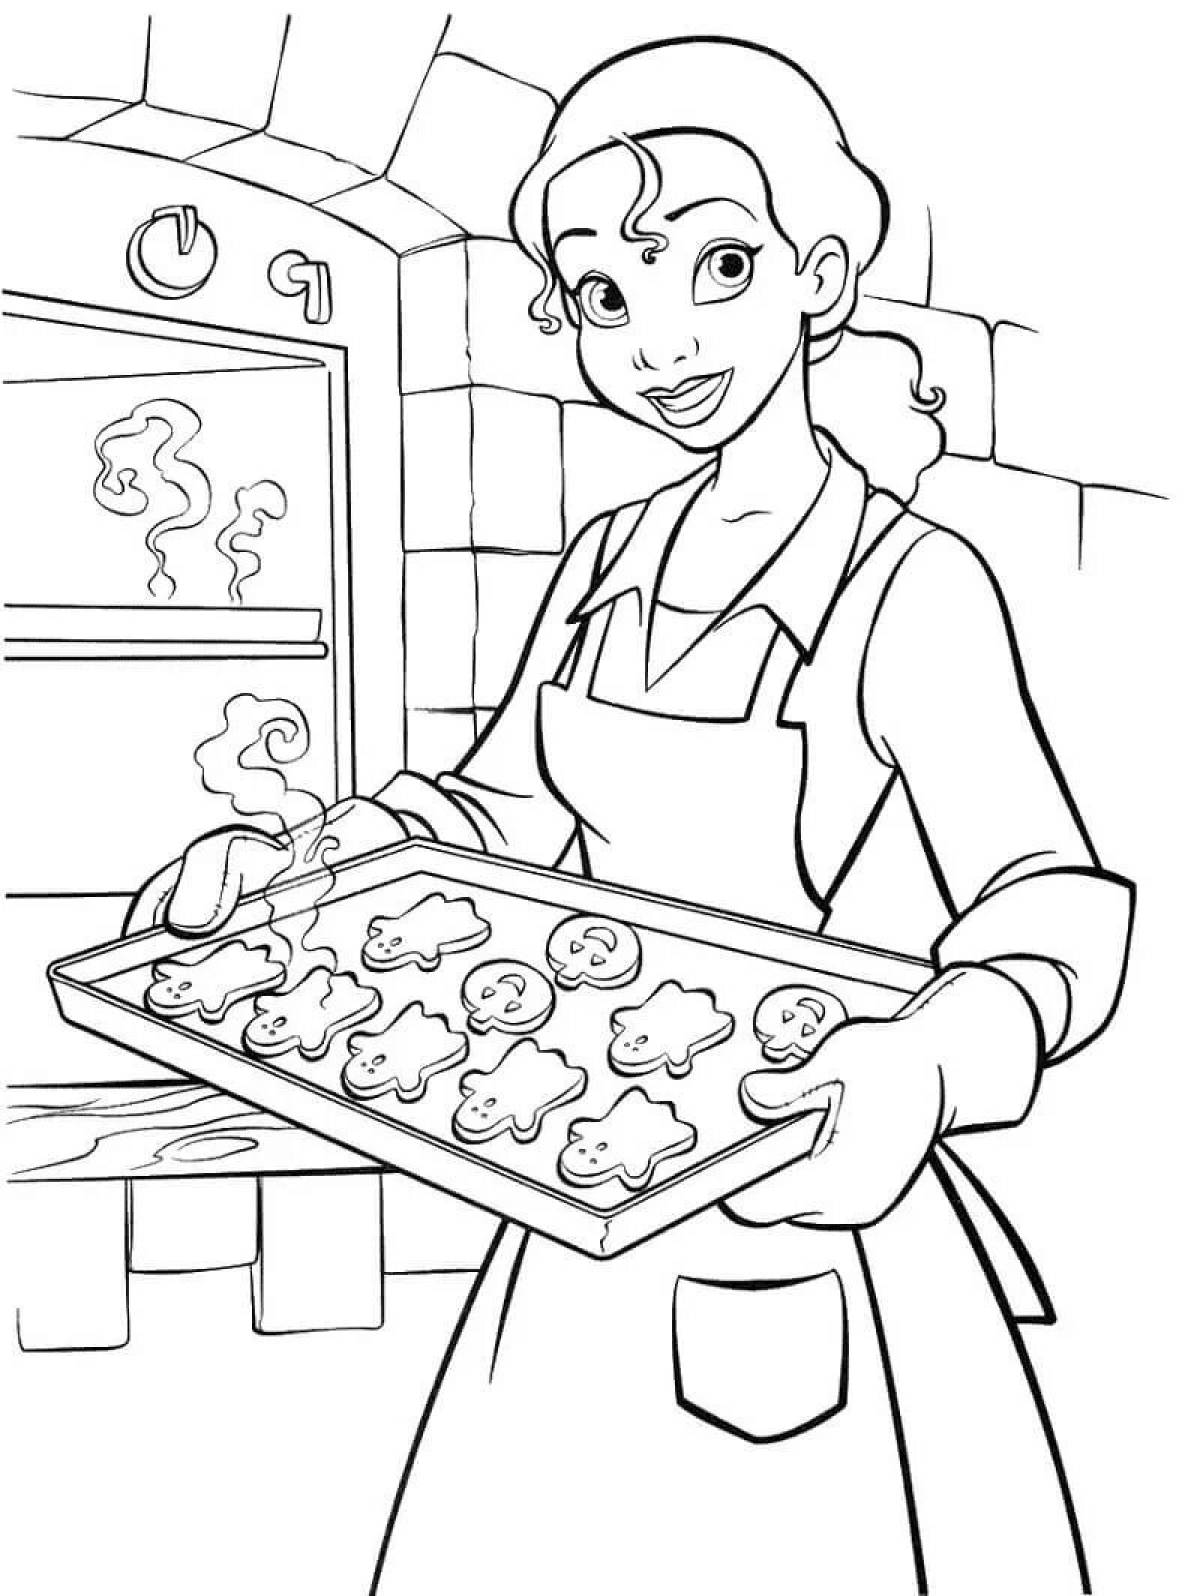 Colorful bright confectioner coloring page